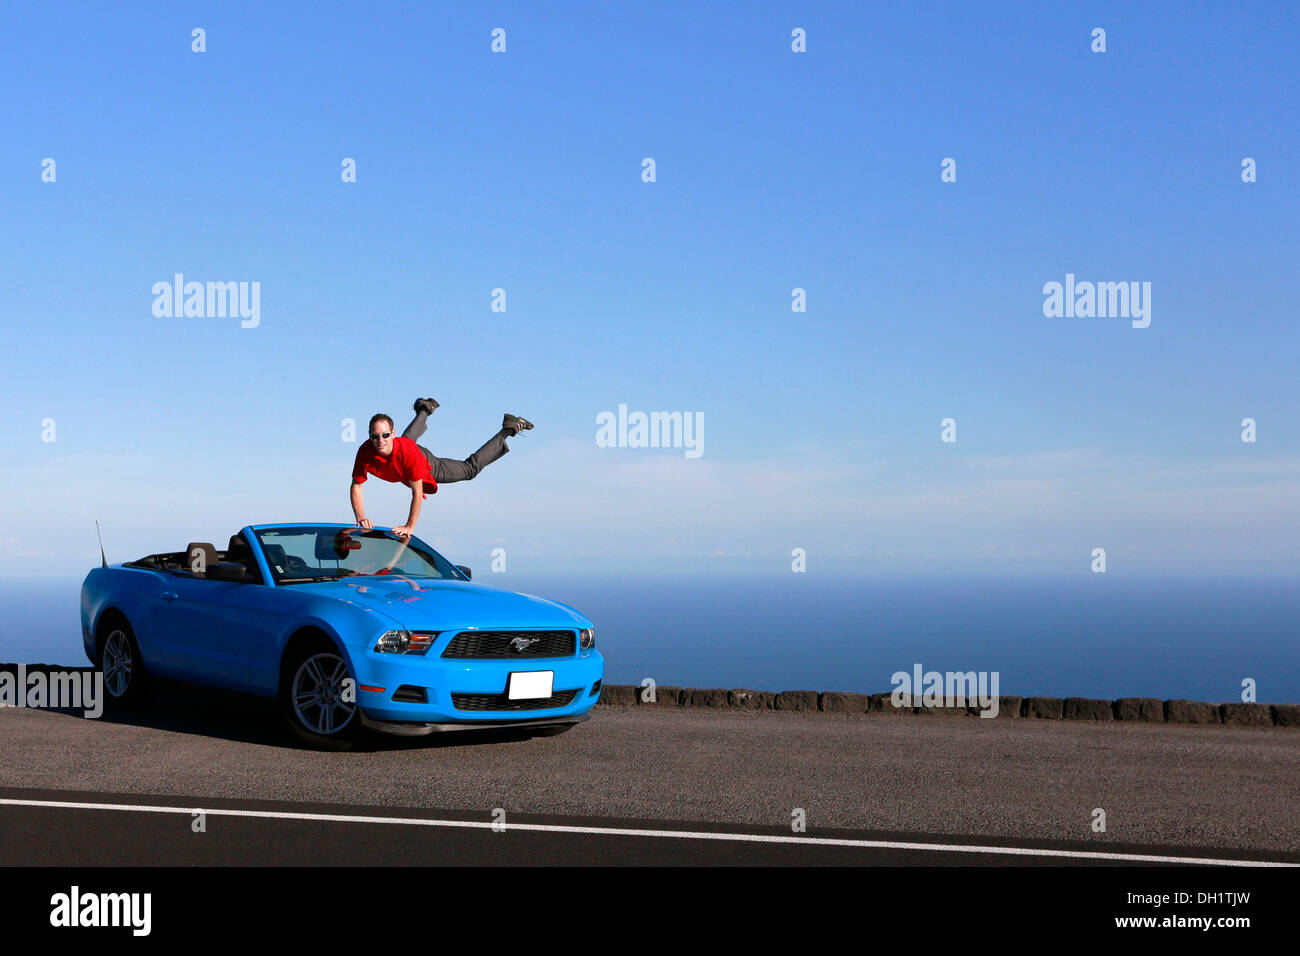 Man jumping with joy on a sky-blue Ford Mustang convertible by the sea, Big Island, Hawaii, USA Stock Photo